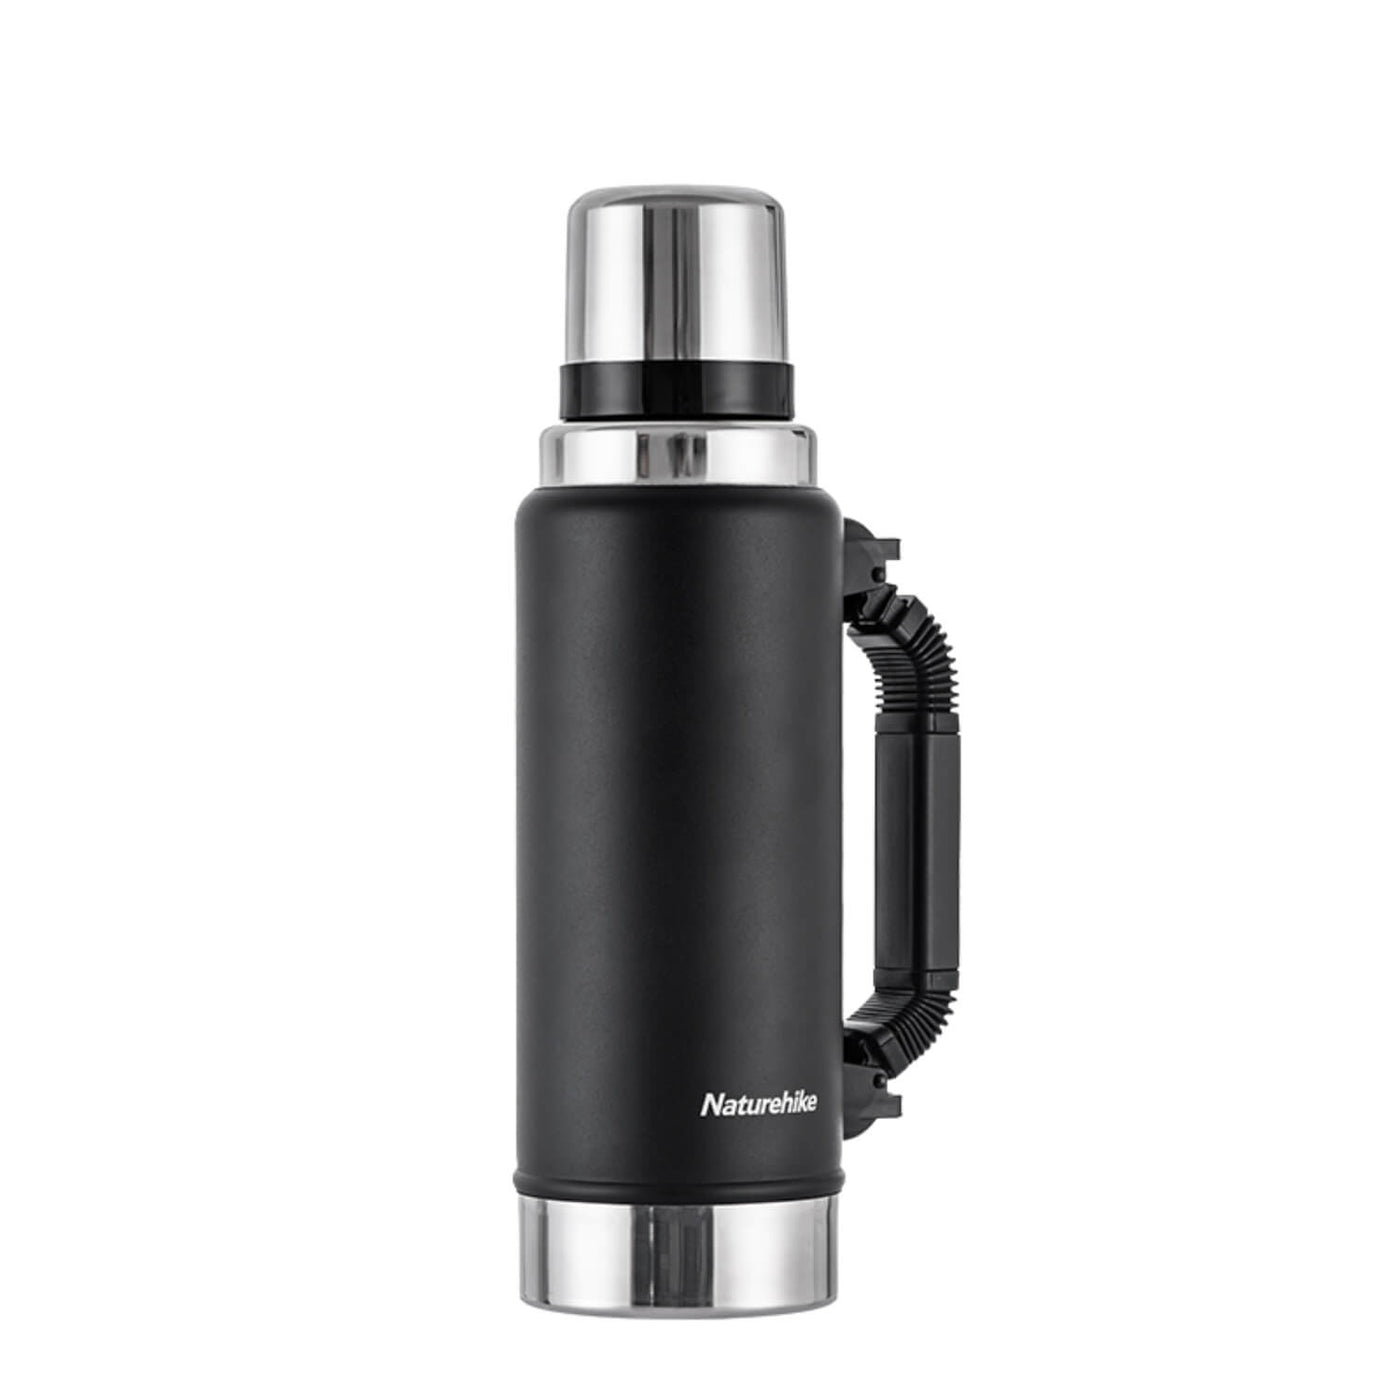 Insulated bottle with handle